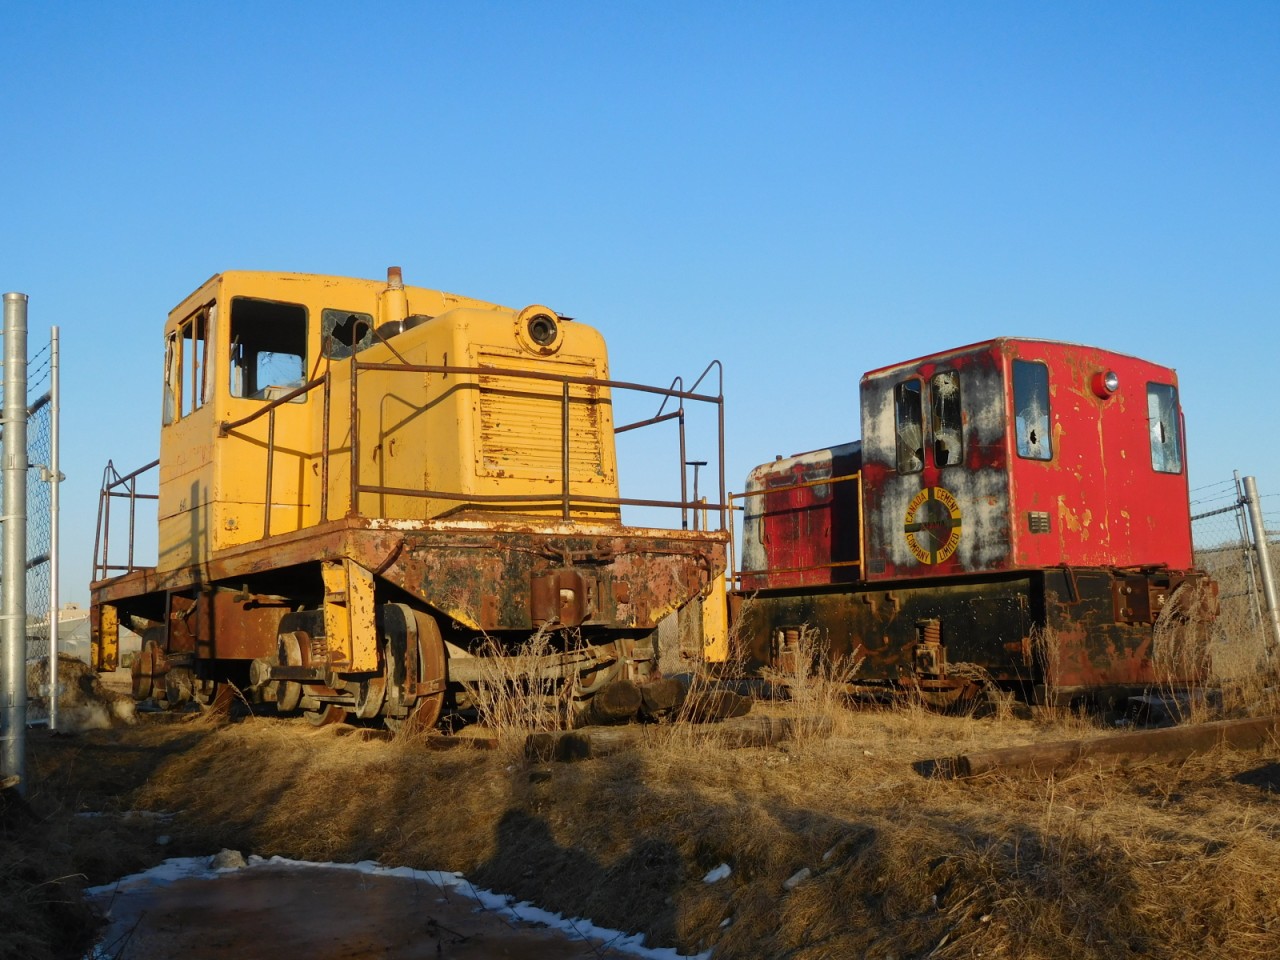 A pair of very old GE's continue to rust away in the Fort Garry Industrial in Winnipeg. The yellow unit (Canada Cement 641) is a GE 50-ton built in May 1947, the red unit (Canada Cement #?) is a GE 15-ton built in April 1955. These units will never run again, unless they get extensive repairs. They are quite clearly in very bad shape, with the windows being smashed, paint fading, and metal rusting. Very sad seeing them like this